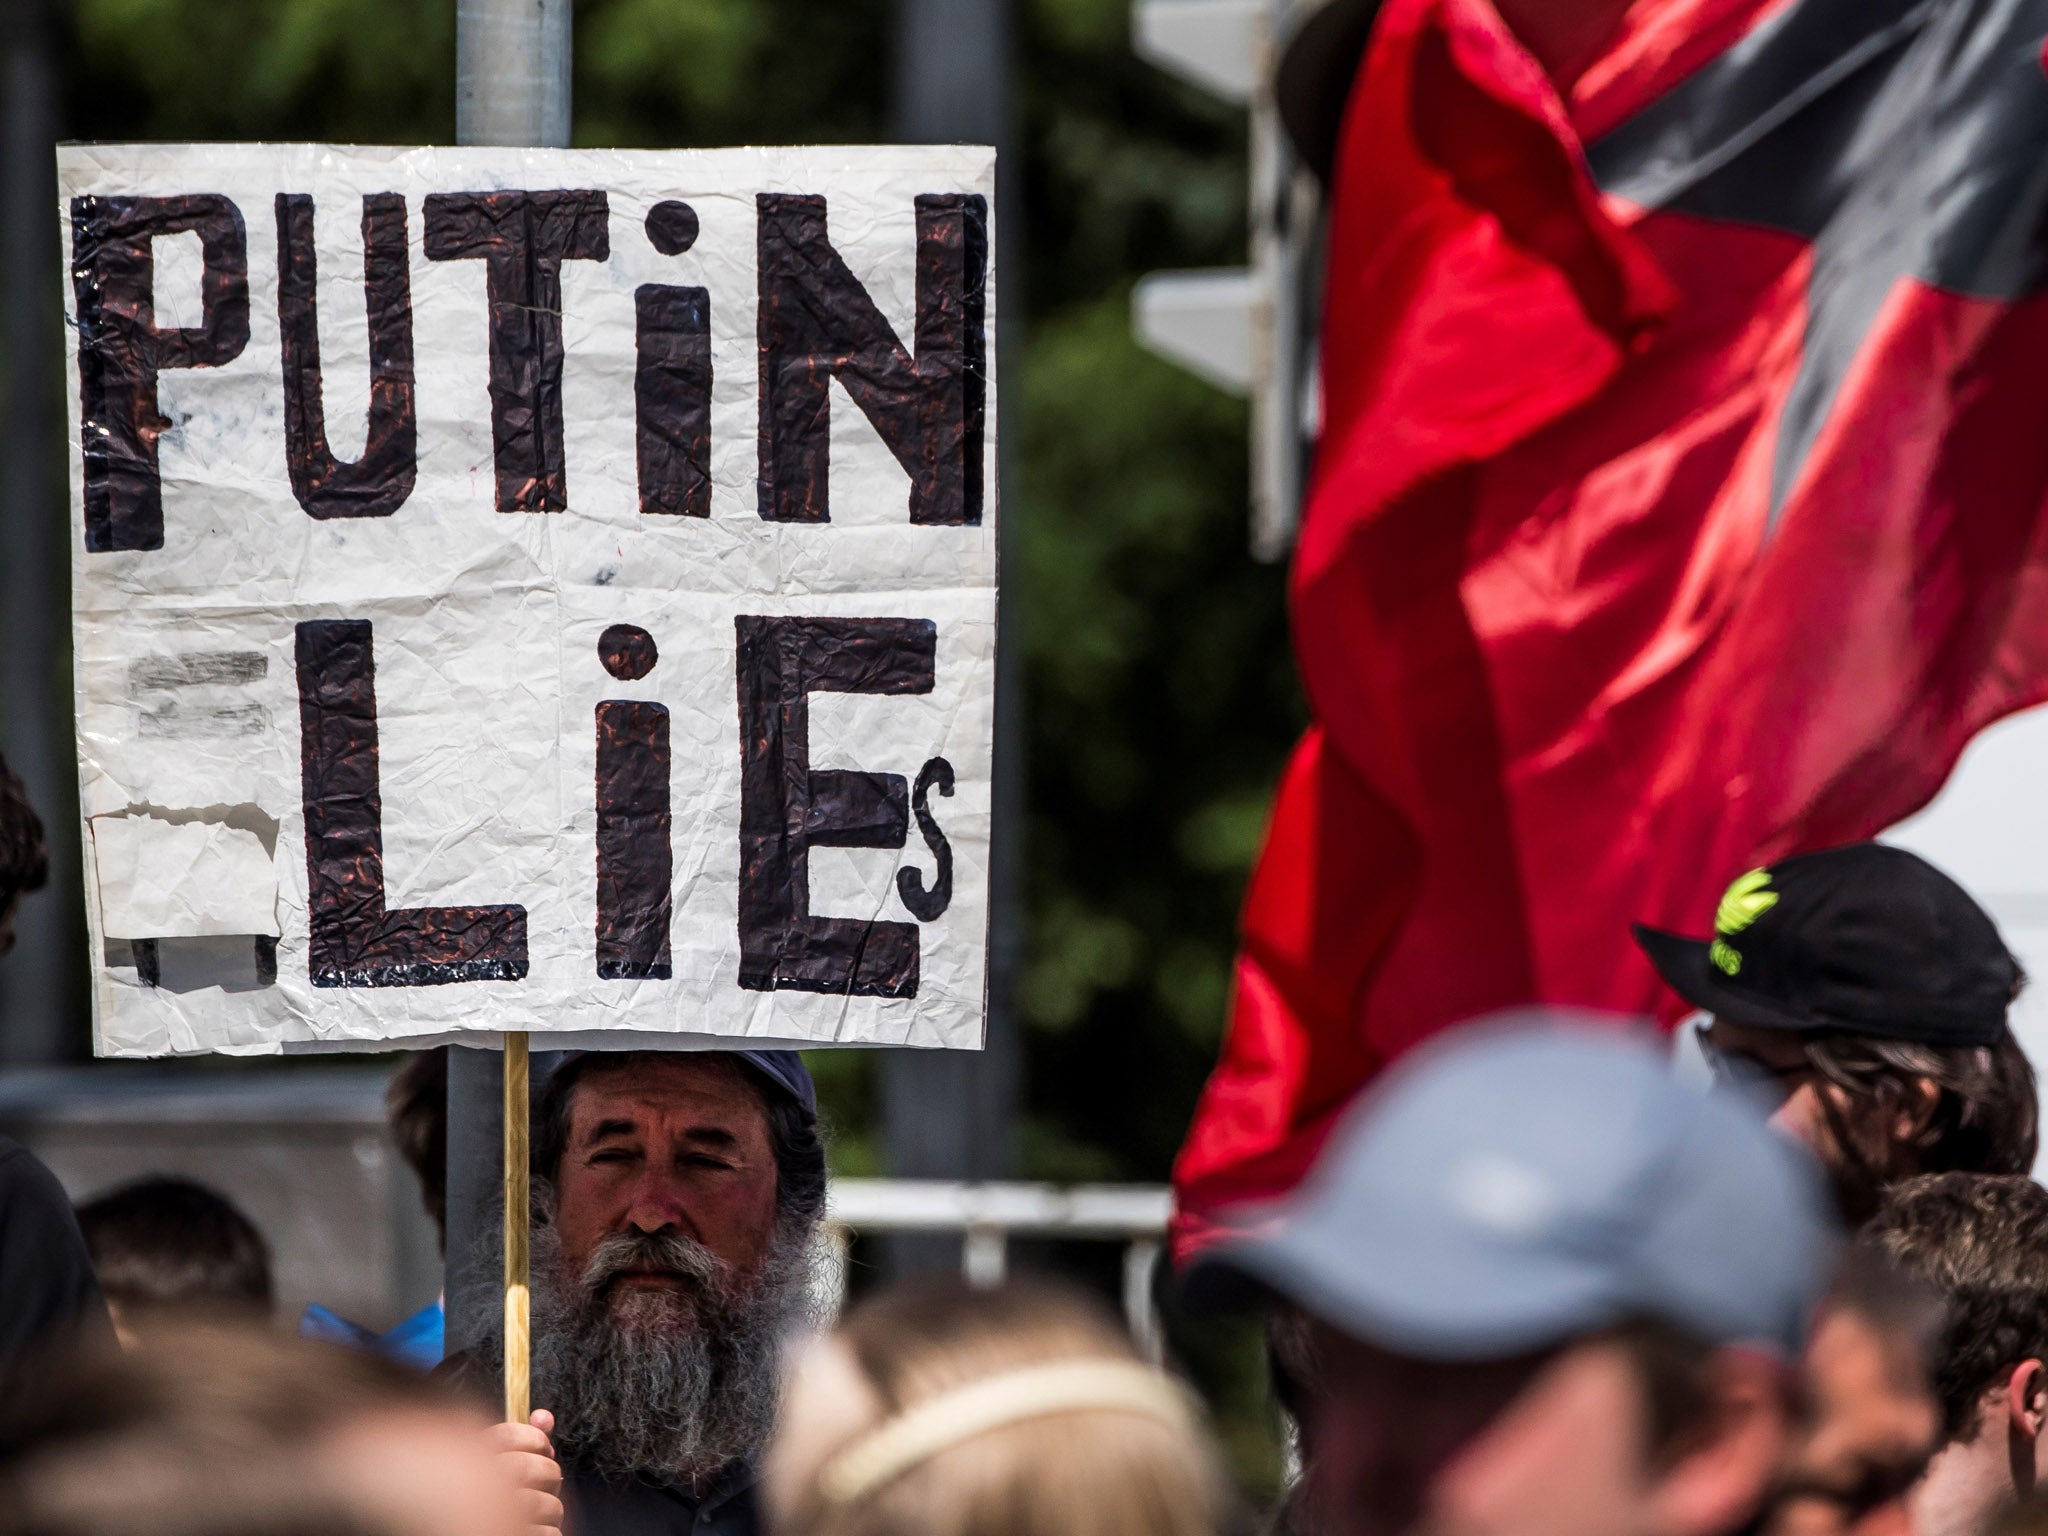 A protester holding a sign at the protest in Moscow. It is not known if this is Grigory Sakonov